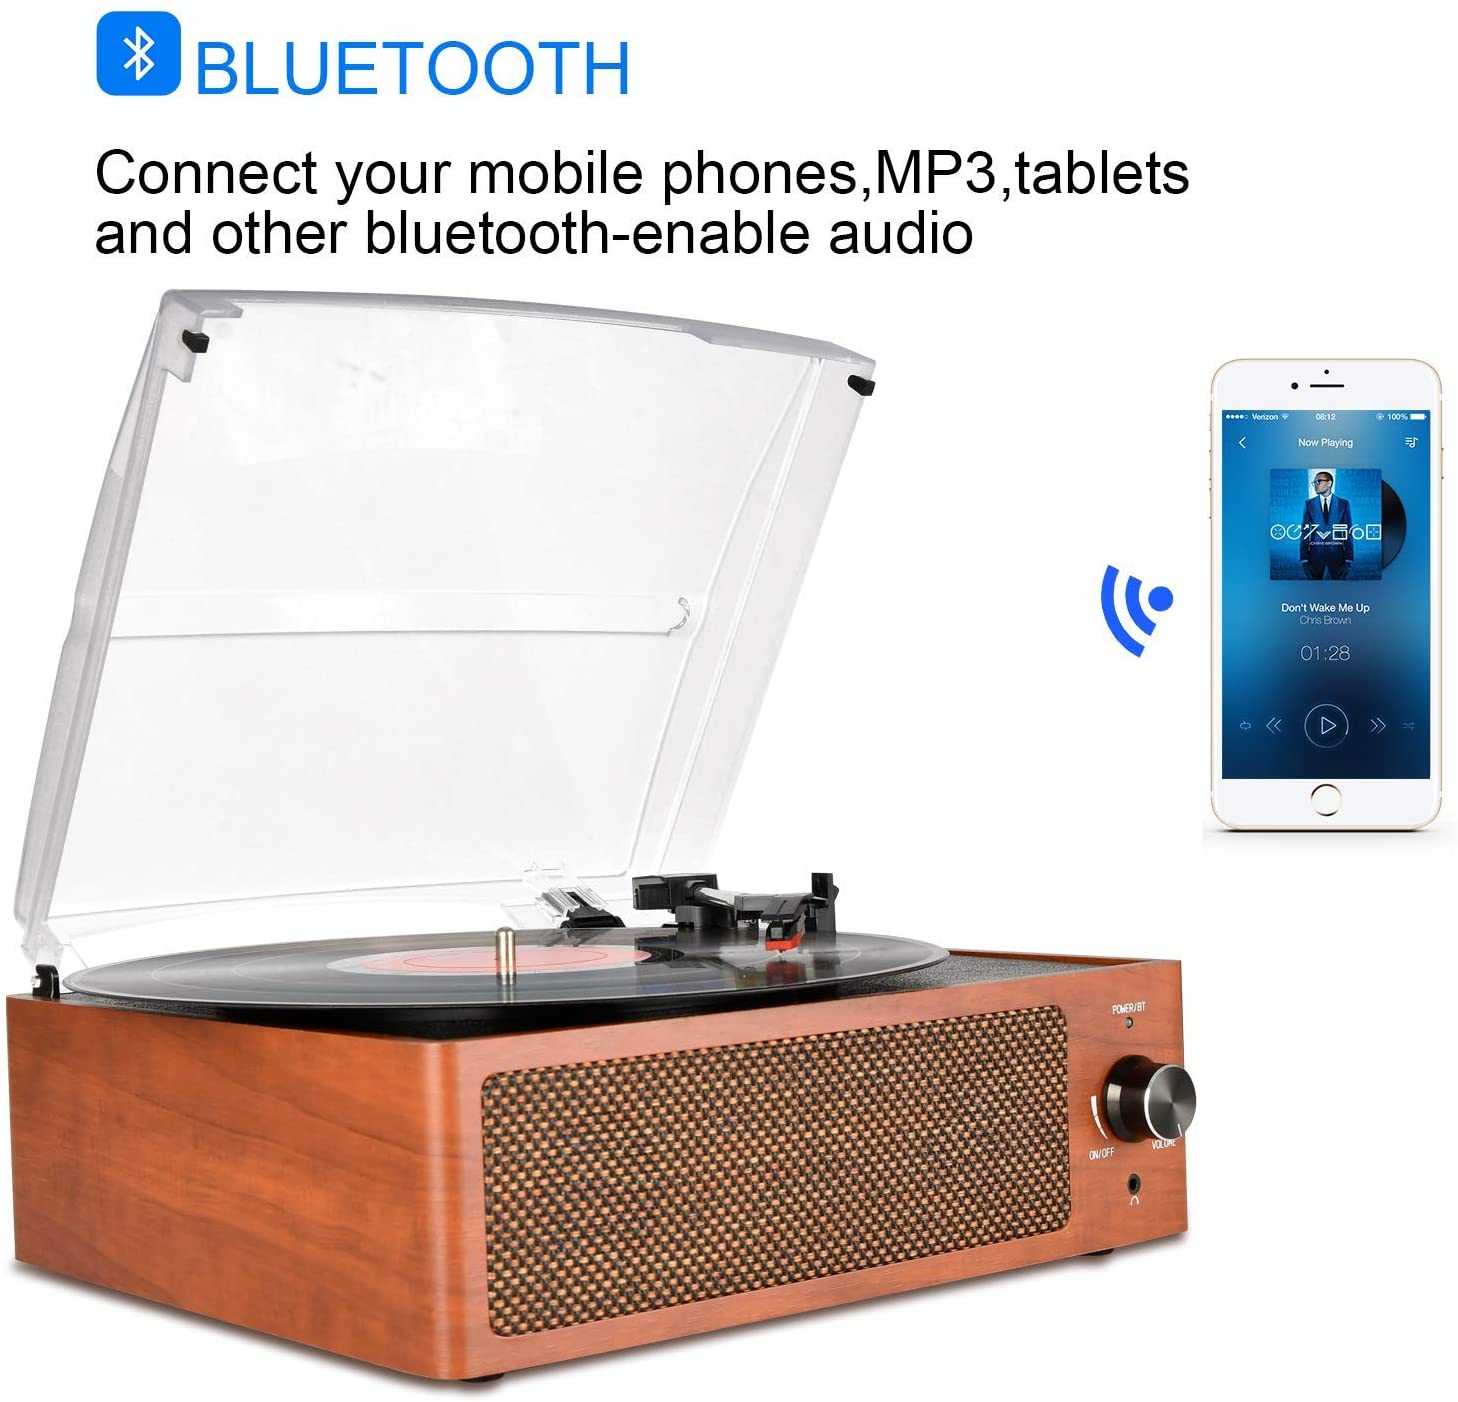 DIGITNOW 7545883392 Bluetooth Record Player Turntable for sale online